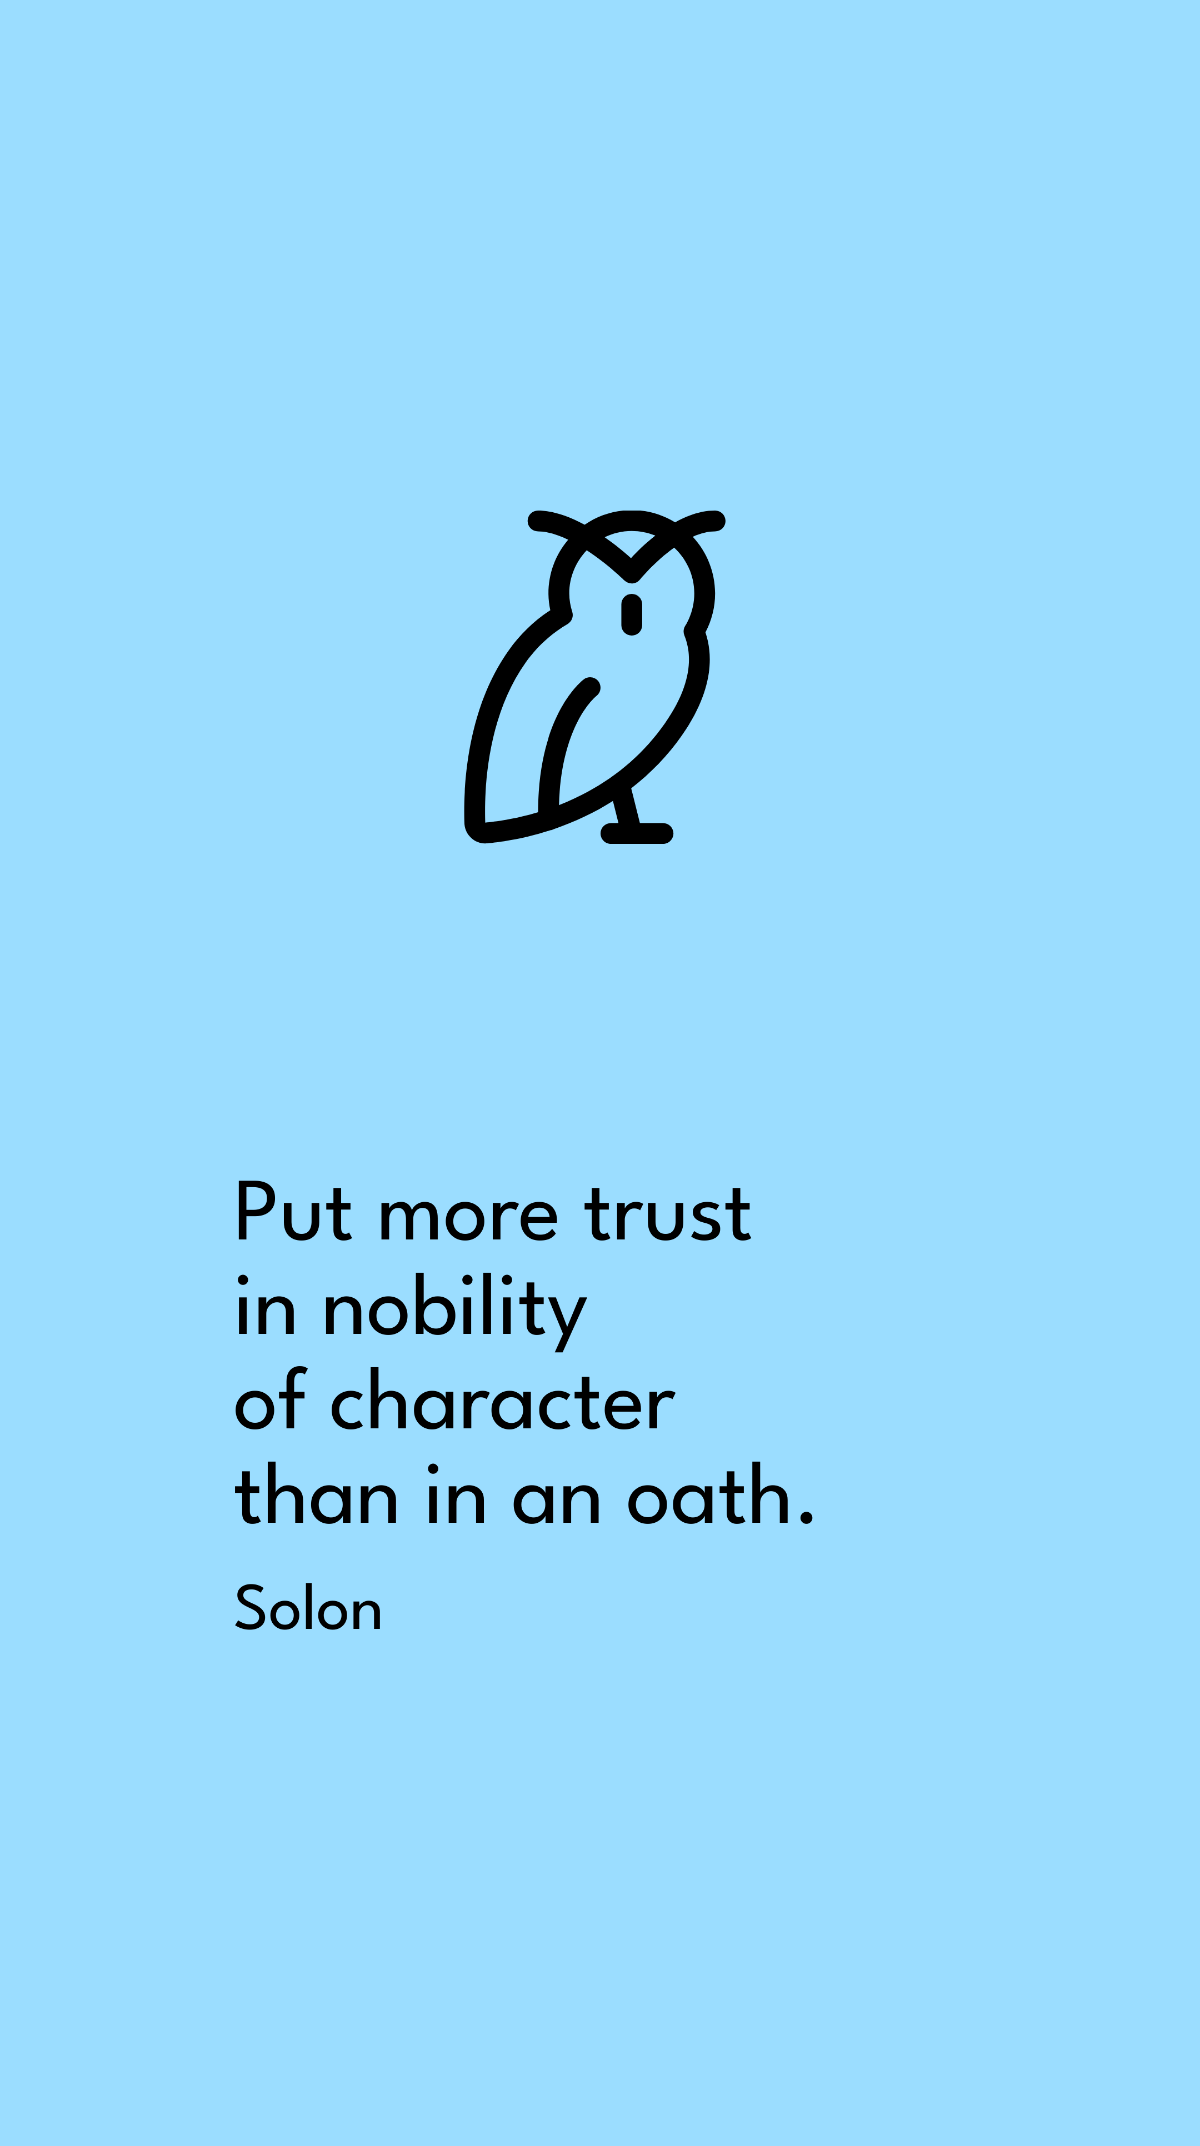 Solon - Put more trust in nobility of character than in an oath. Template